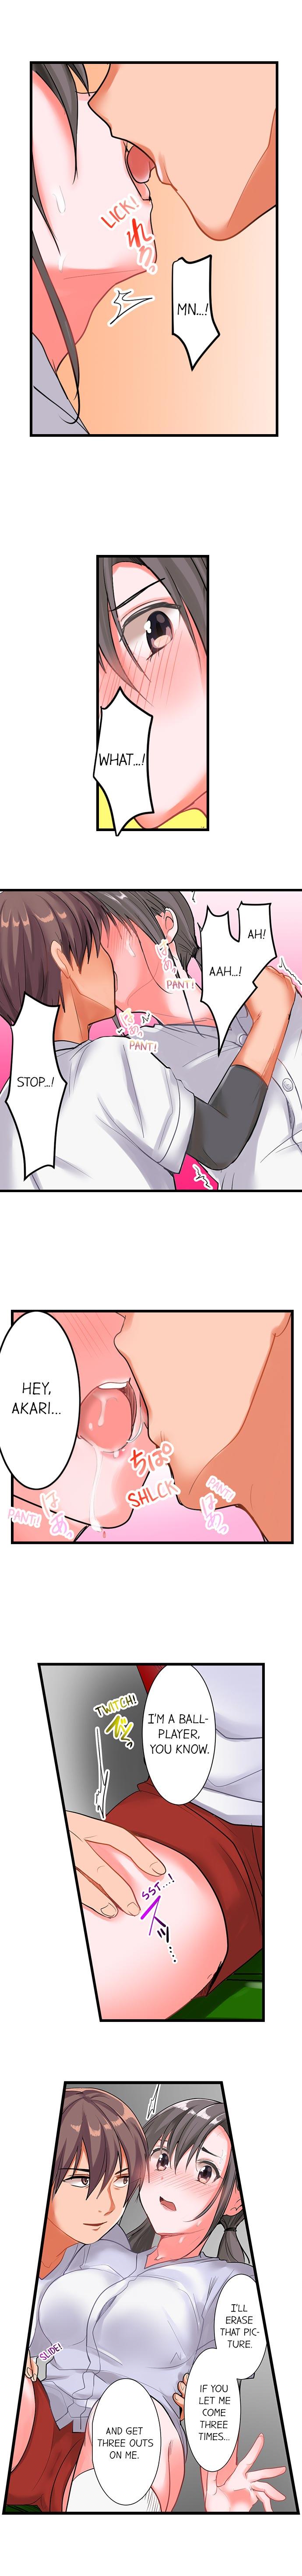 The Day She Became a Sex Toy (Complete] 13